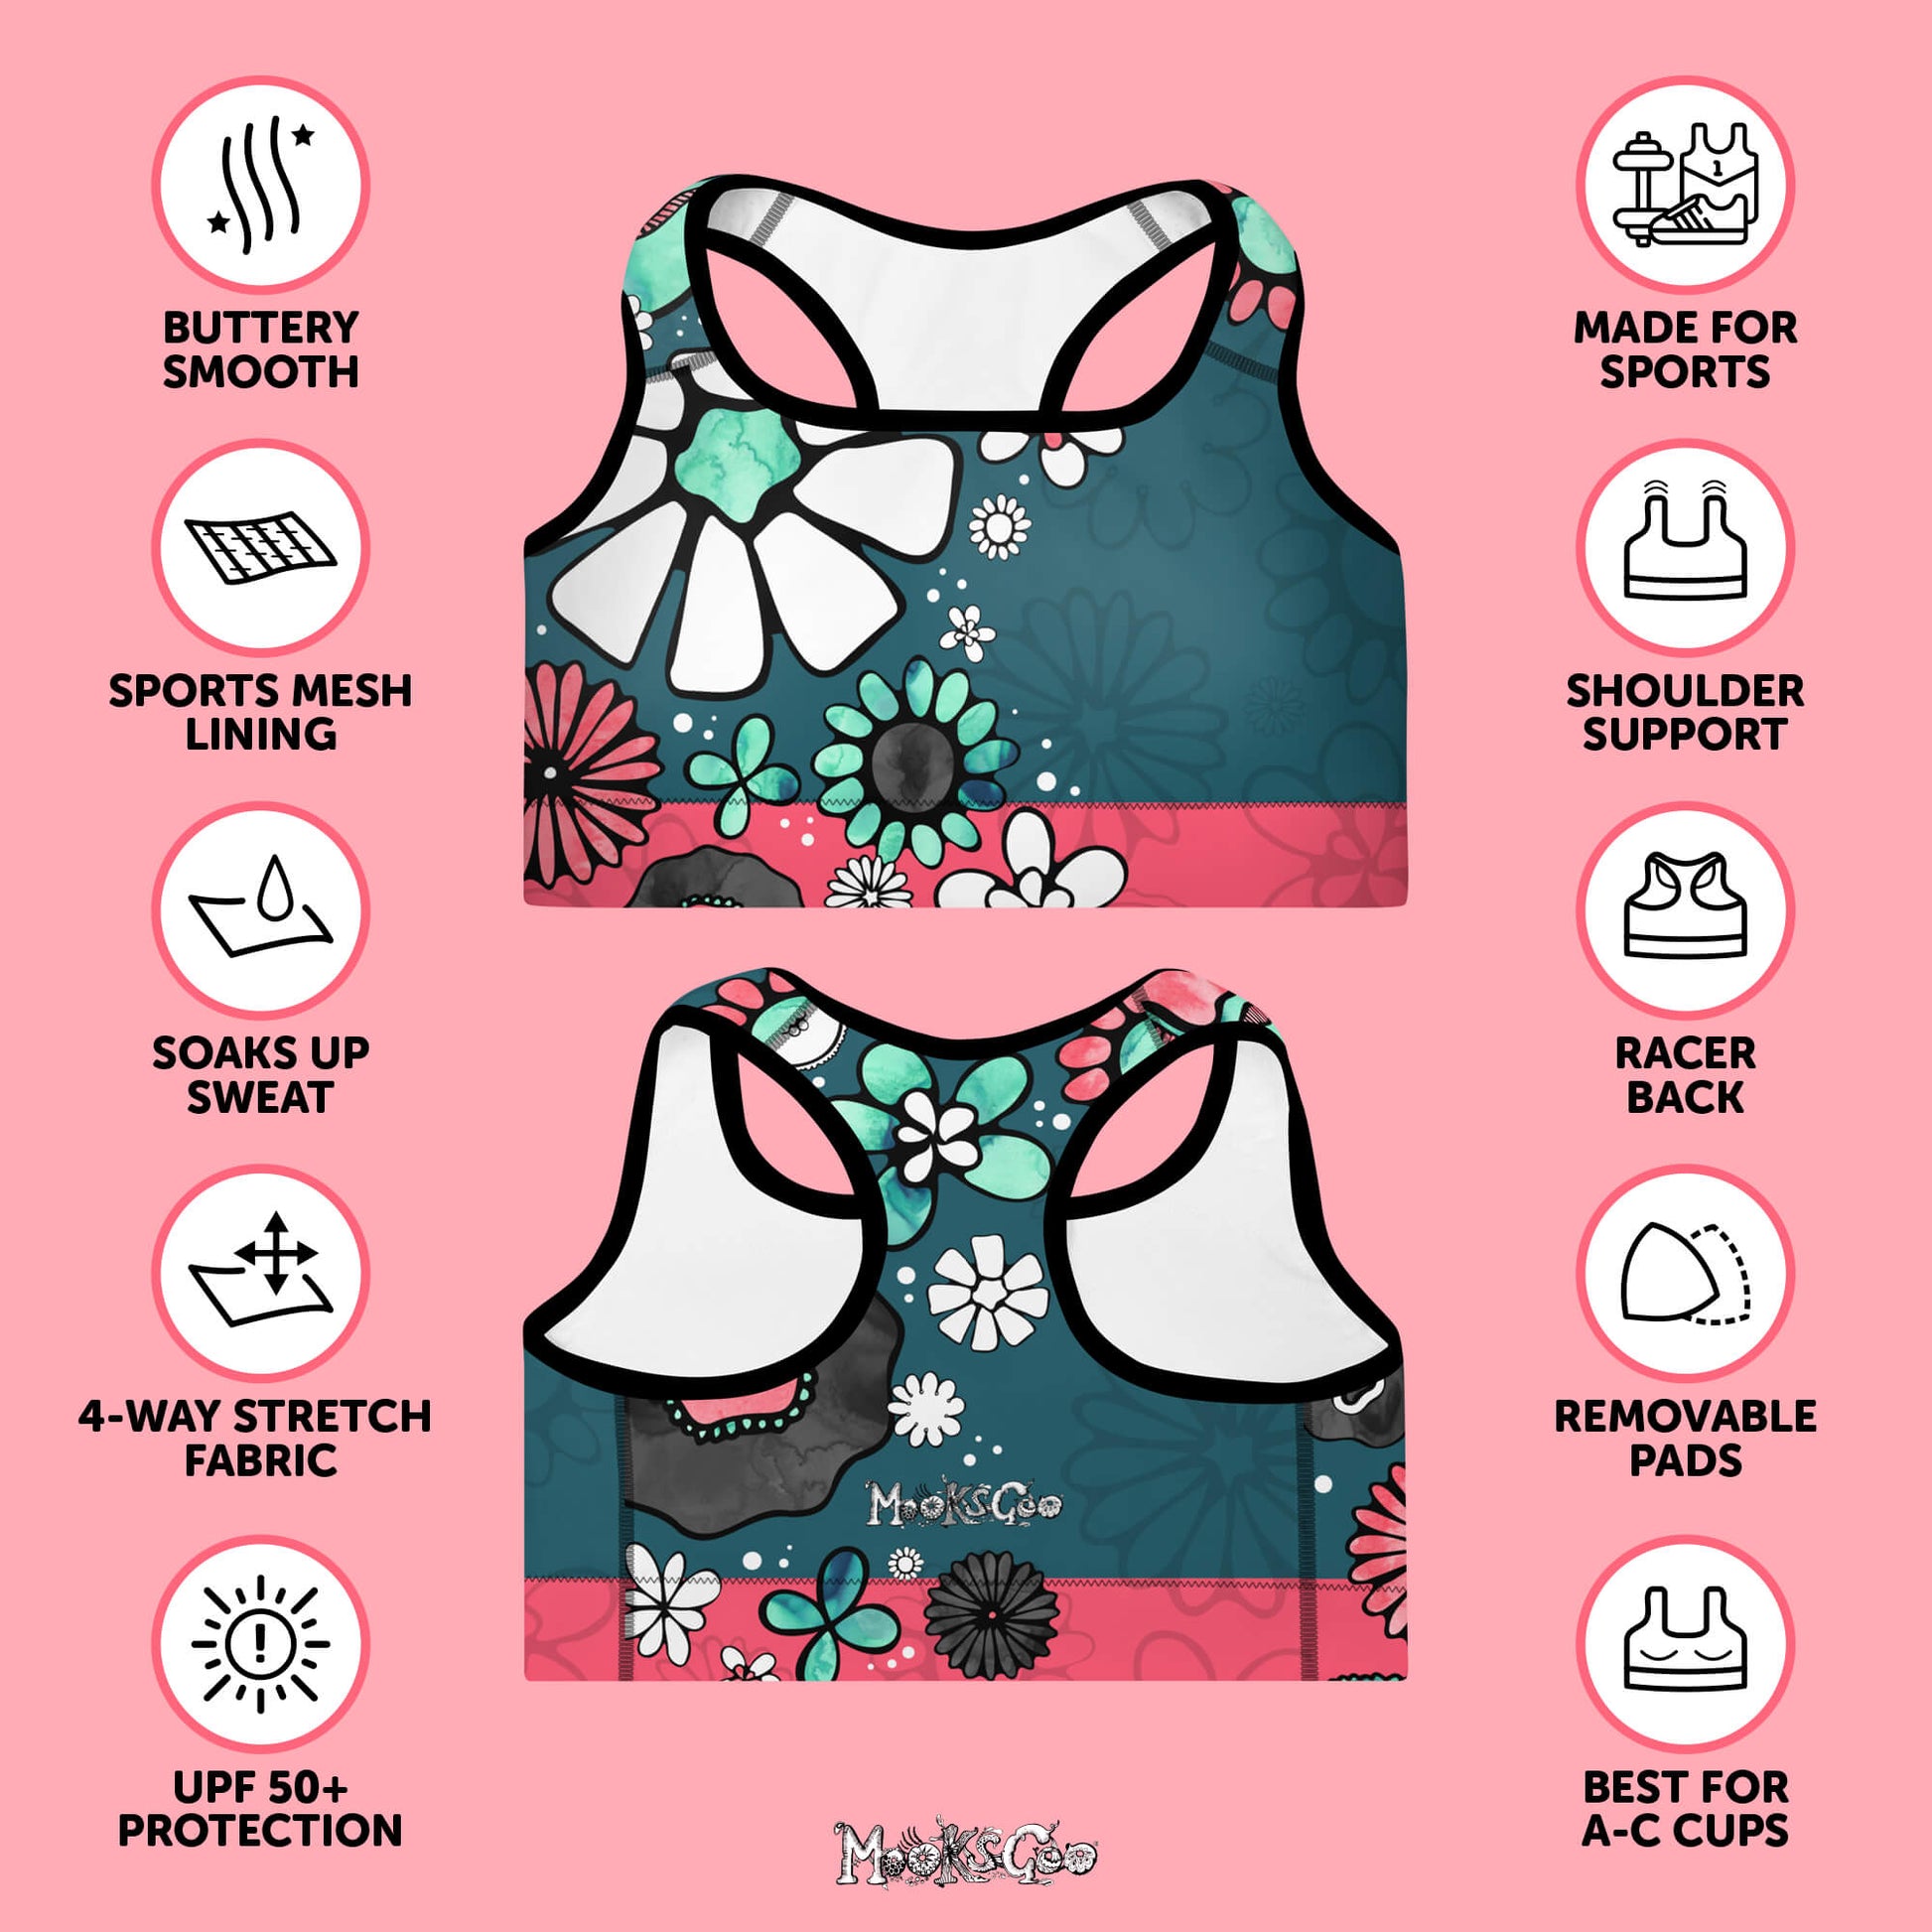 Supportive sports bra with illustrated turquoise and coral pink flowers. Buttery smooth, sports mesh lining, soaks up sweat, 4-way stretch fabric, UPF 50+ sun protection, made for sports and workouts, shoulder support, racer back style, removable pads for easy washing, best for a-c cups. Designed by MooksGoo.